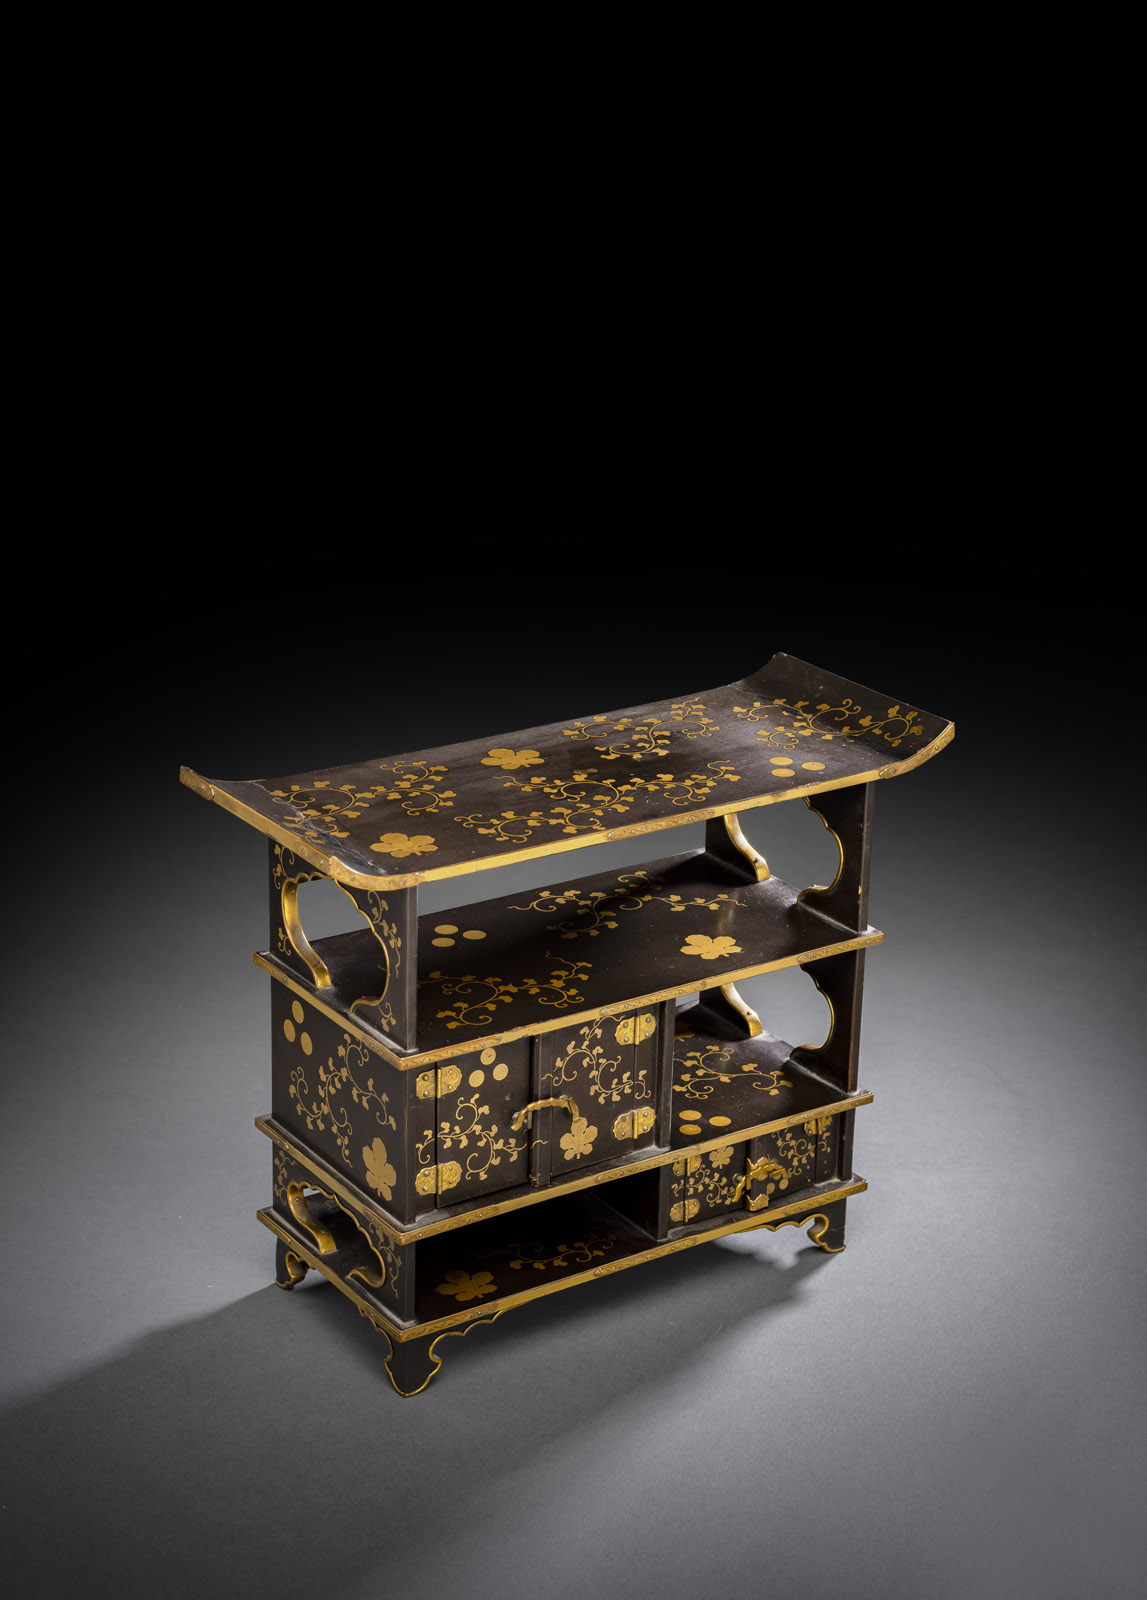 <b>A SMALL GOLD-INLAID LACQUER CABINET</b>